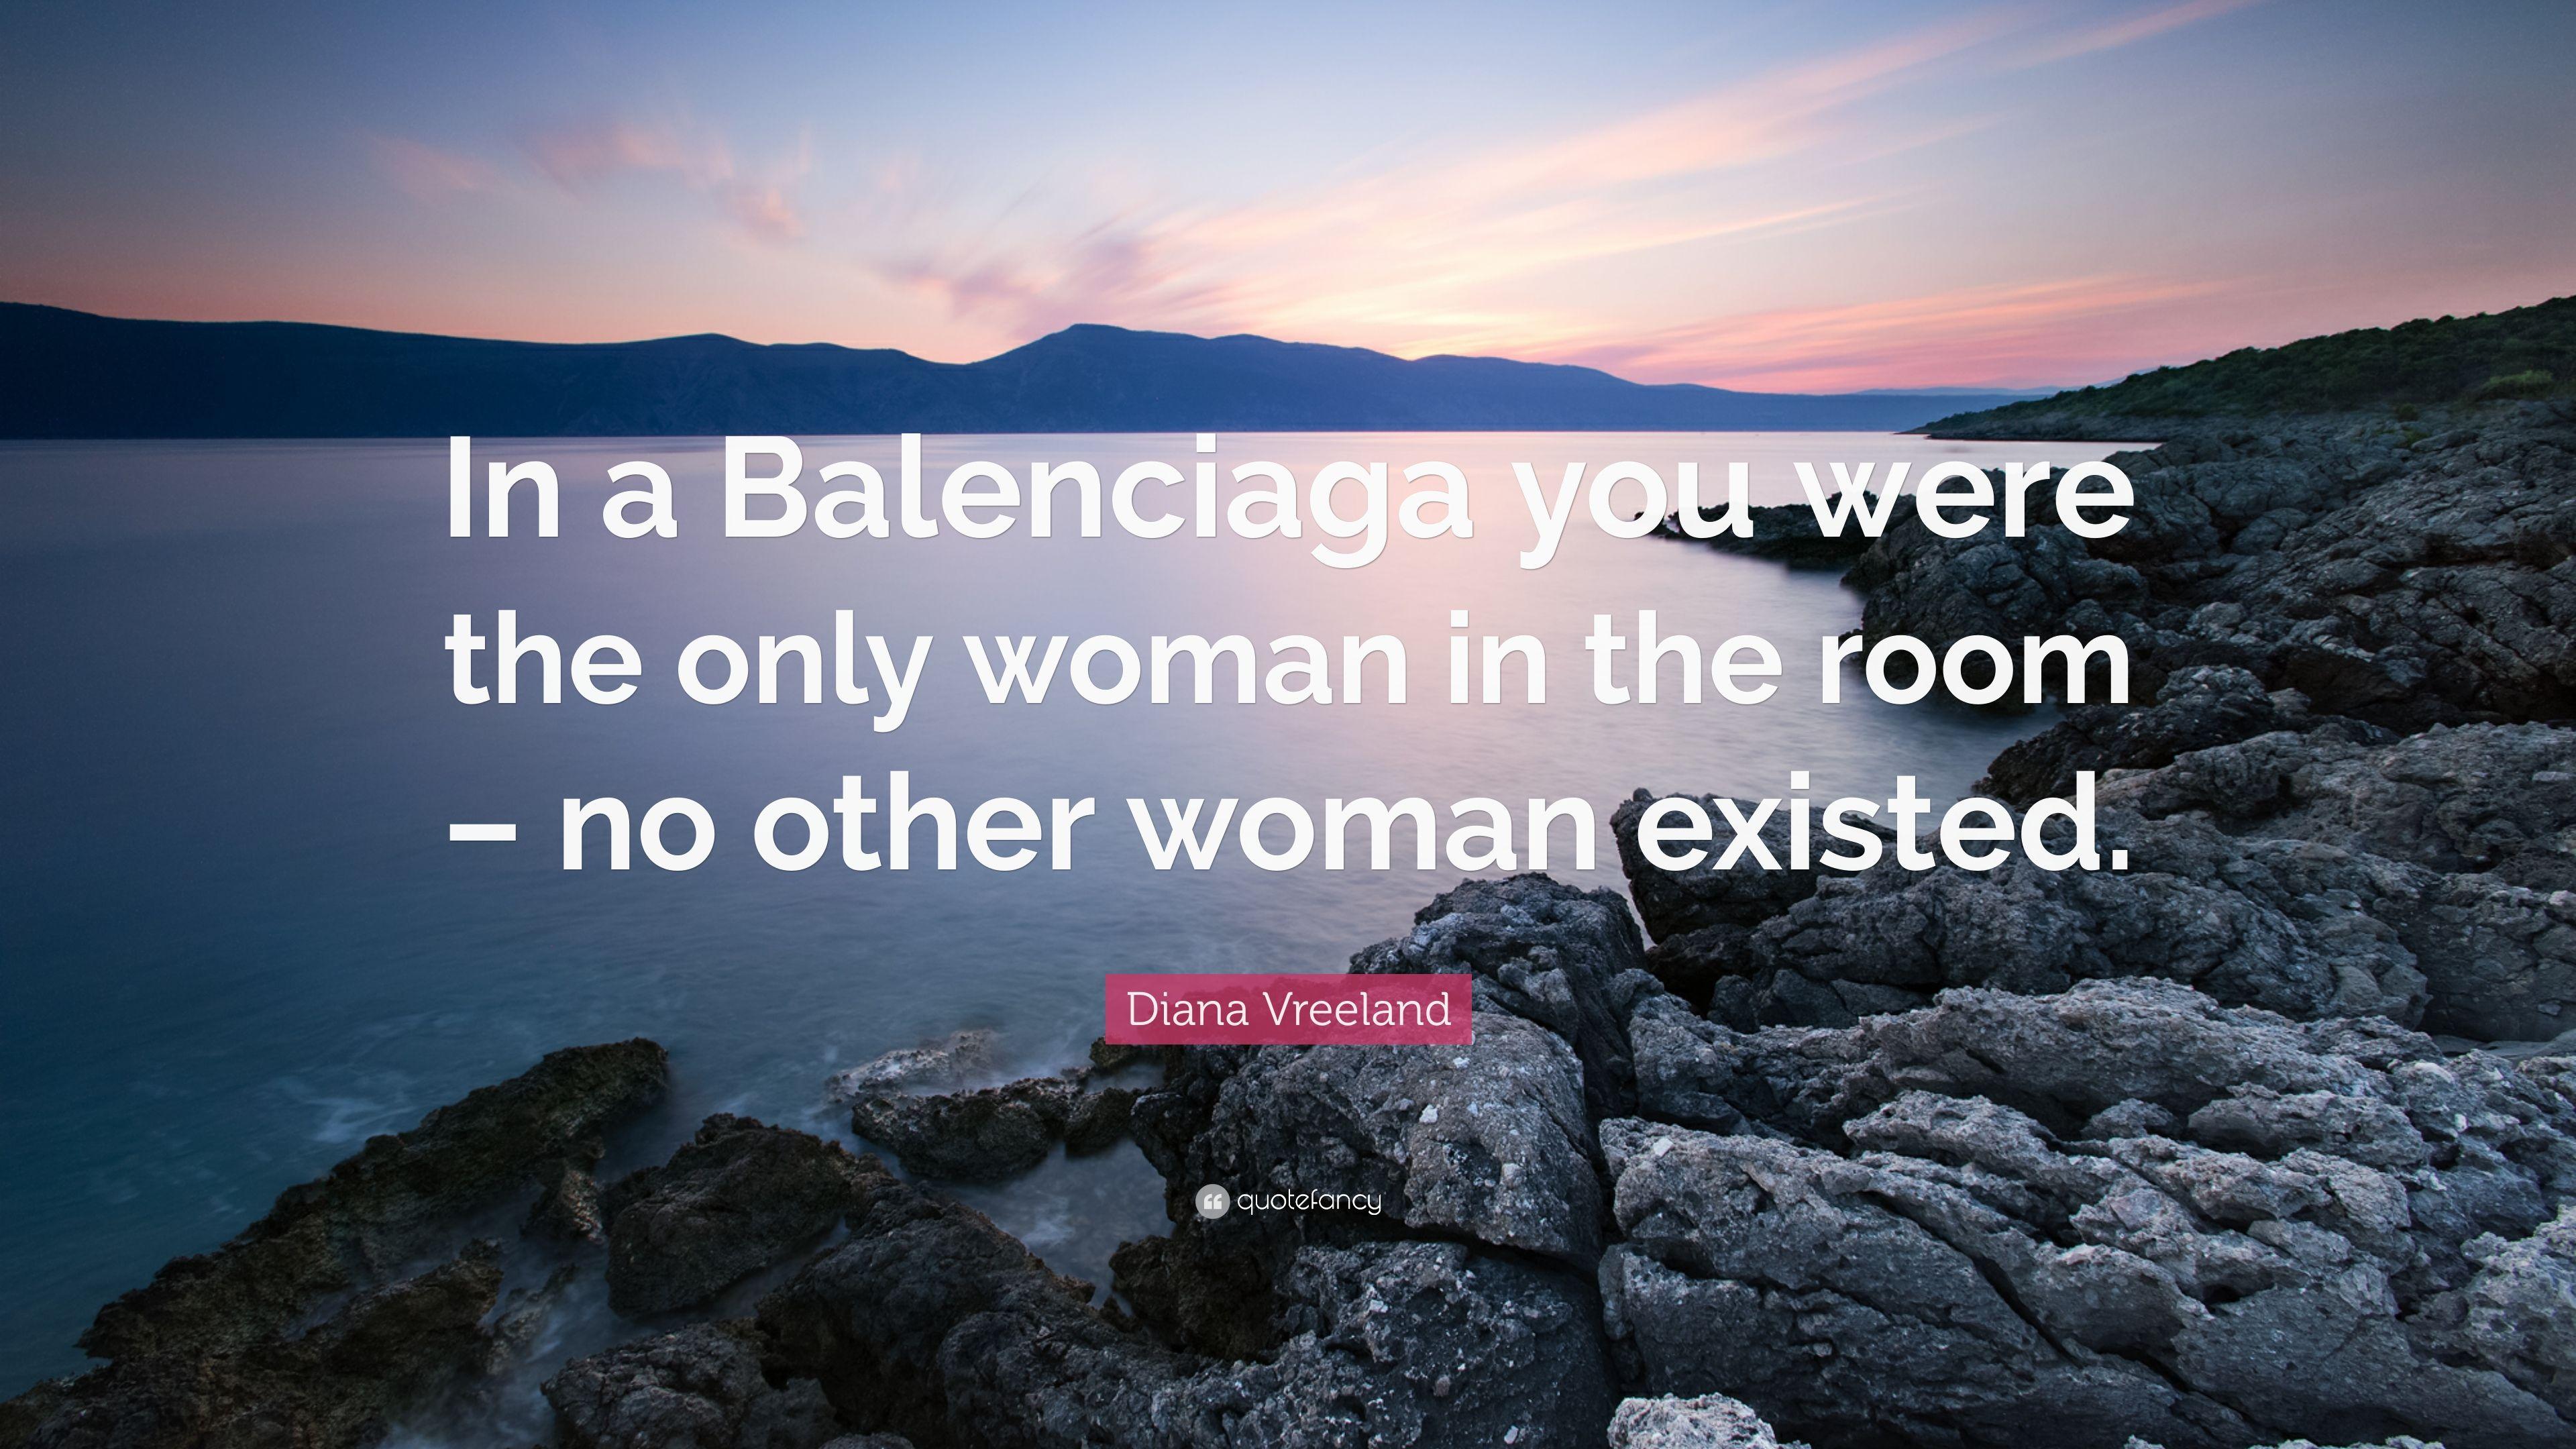 Diana Vreeland Quote: “In a Balenciaga you were the only woman